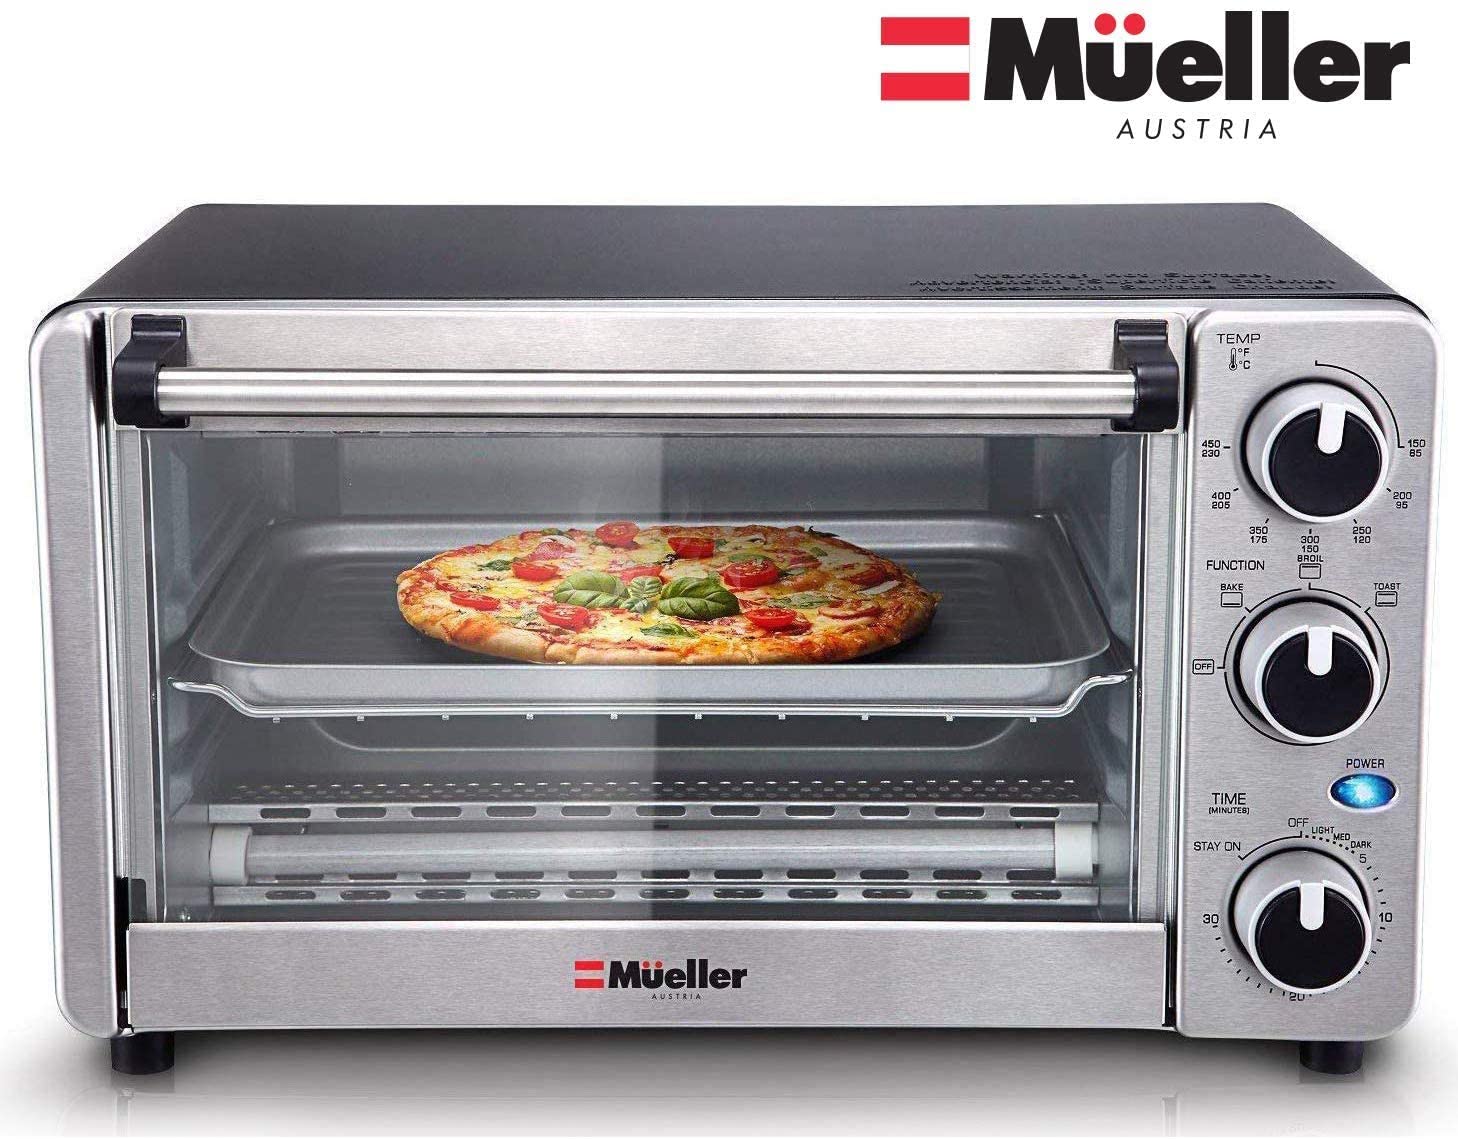 Mueller Austria Multi-Function Toaster Convection Oven